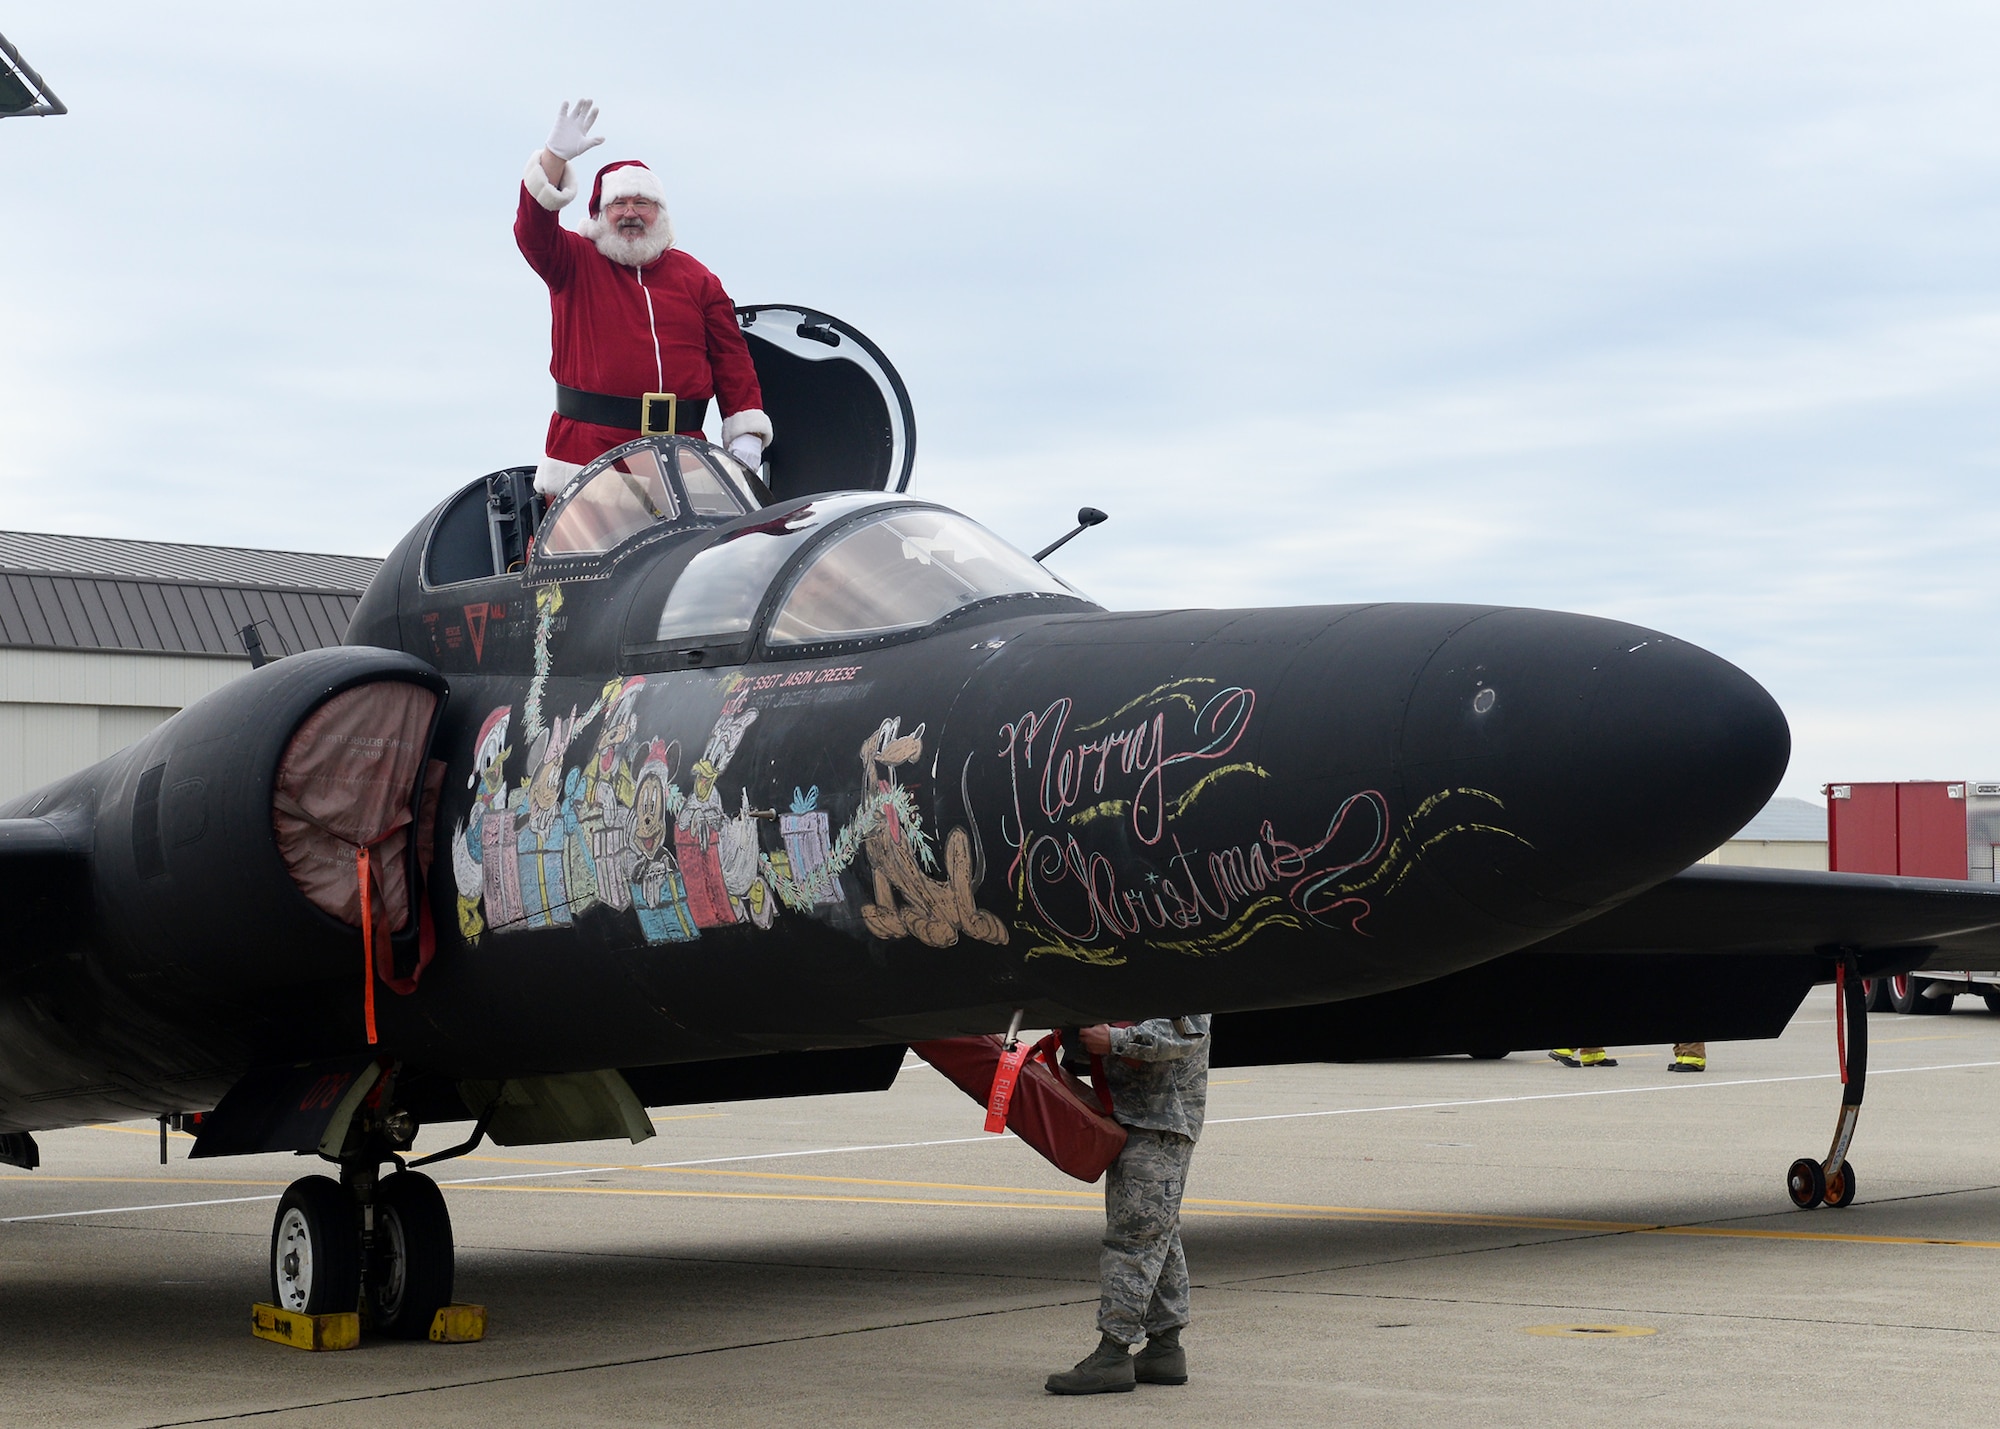 Santa Clause emerges from a U-2 Dragon Lady during the annual Children's Holiday Party Dec. 12, 2015, at Beale Air Force Base, California. Thousands of presents were donated by multiple suppliers and were handed out to the children of Team Beale. In addition, the event included photos with Santa Clause and his elves, a raffle and various holiday activities. (U.S. Air Force photo by Airman 1st Class Ramon A. Adelan)